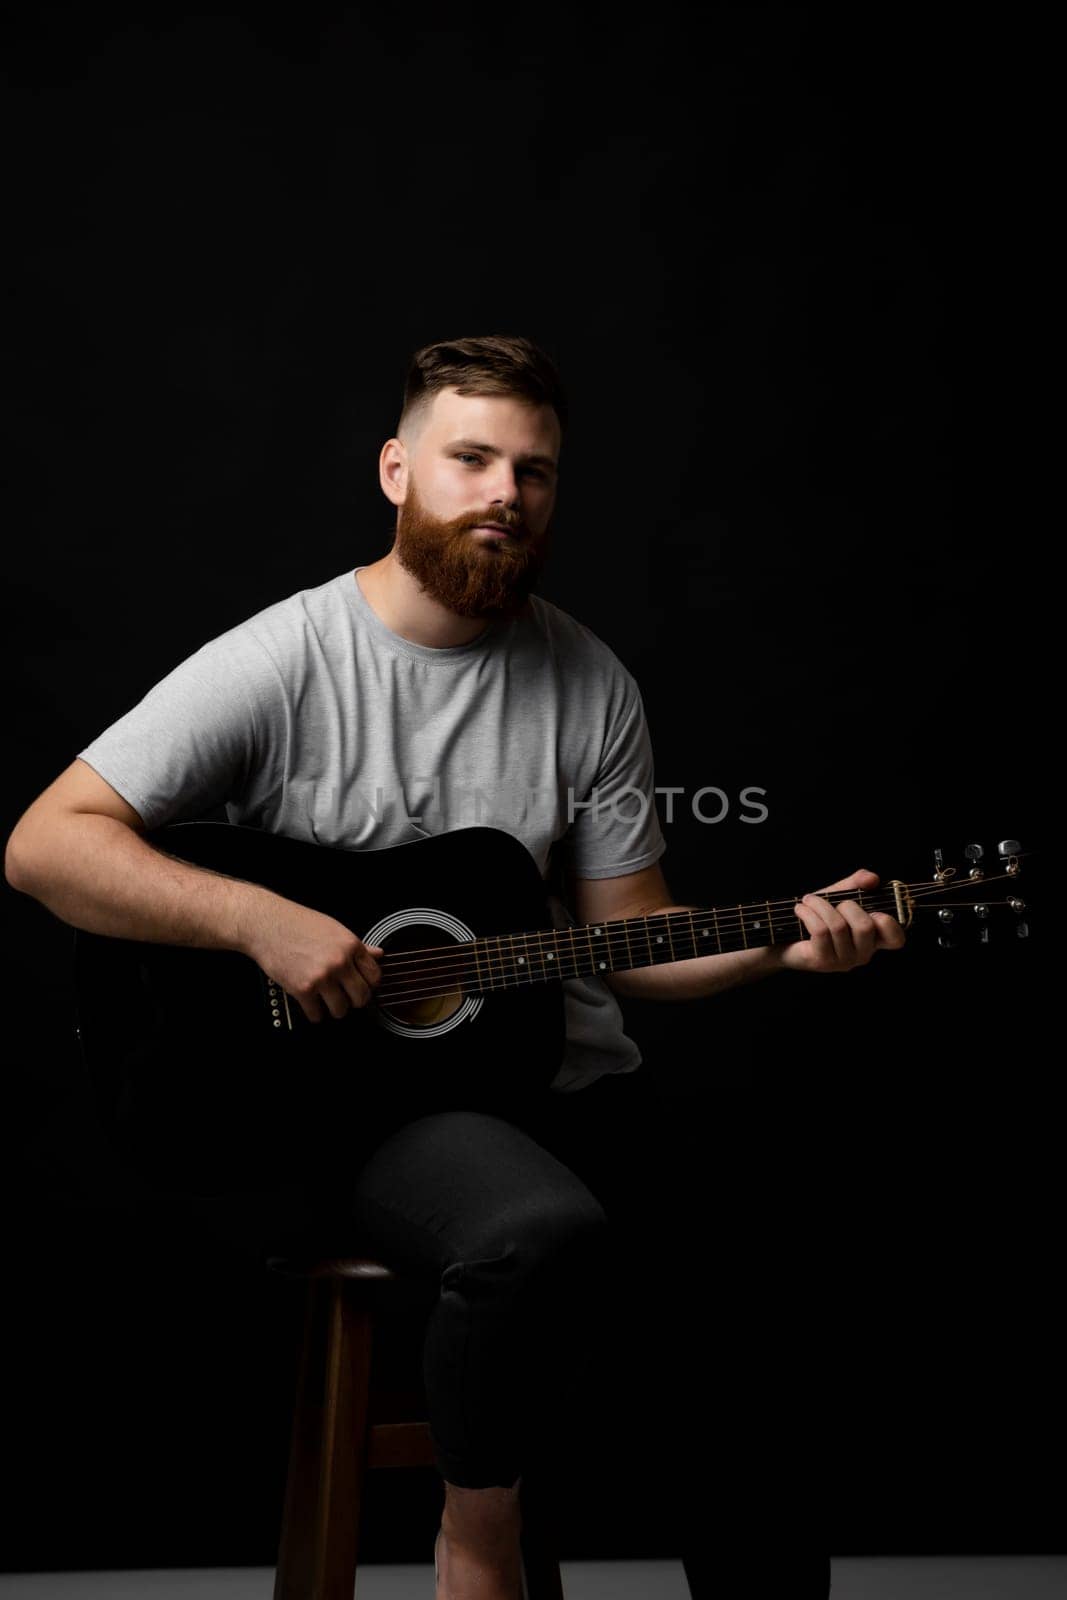 Portaraite of bearded musician man playing acoustic guitar in a dark room. by vovsht